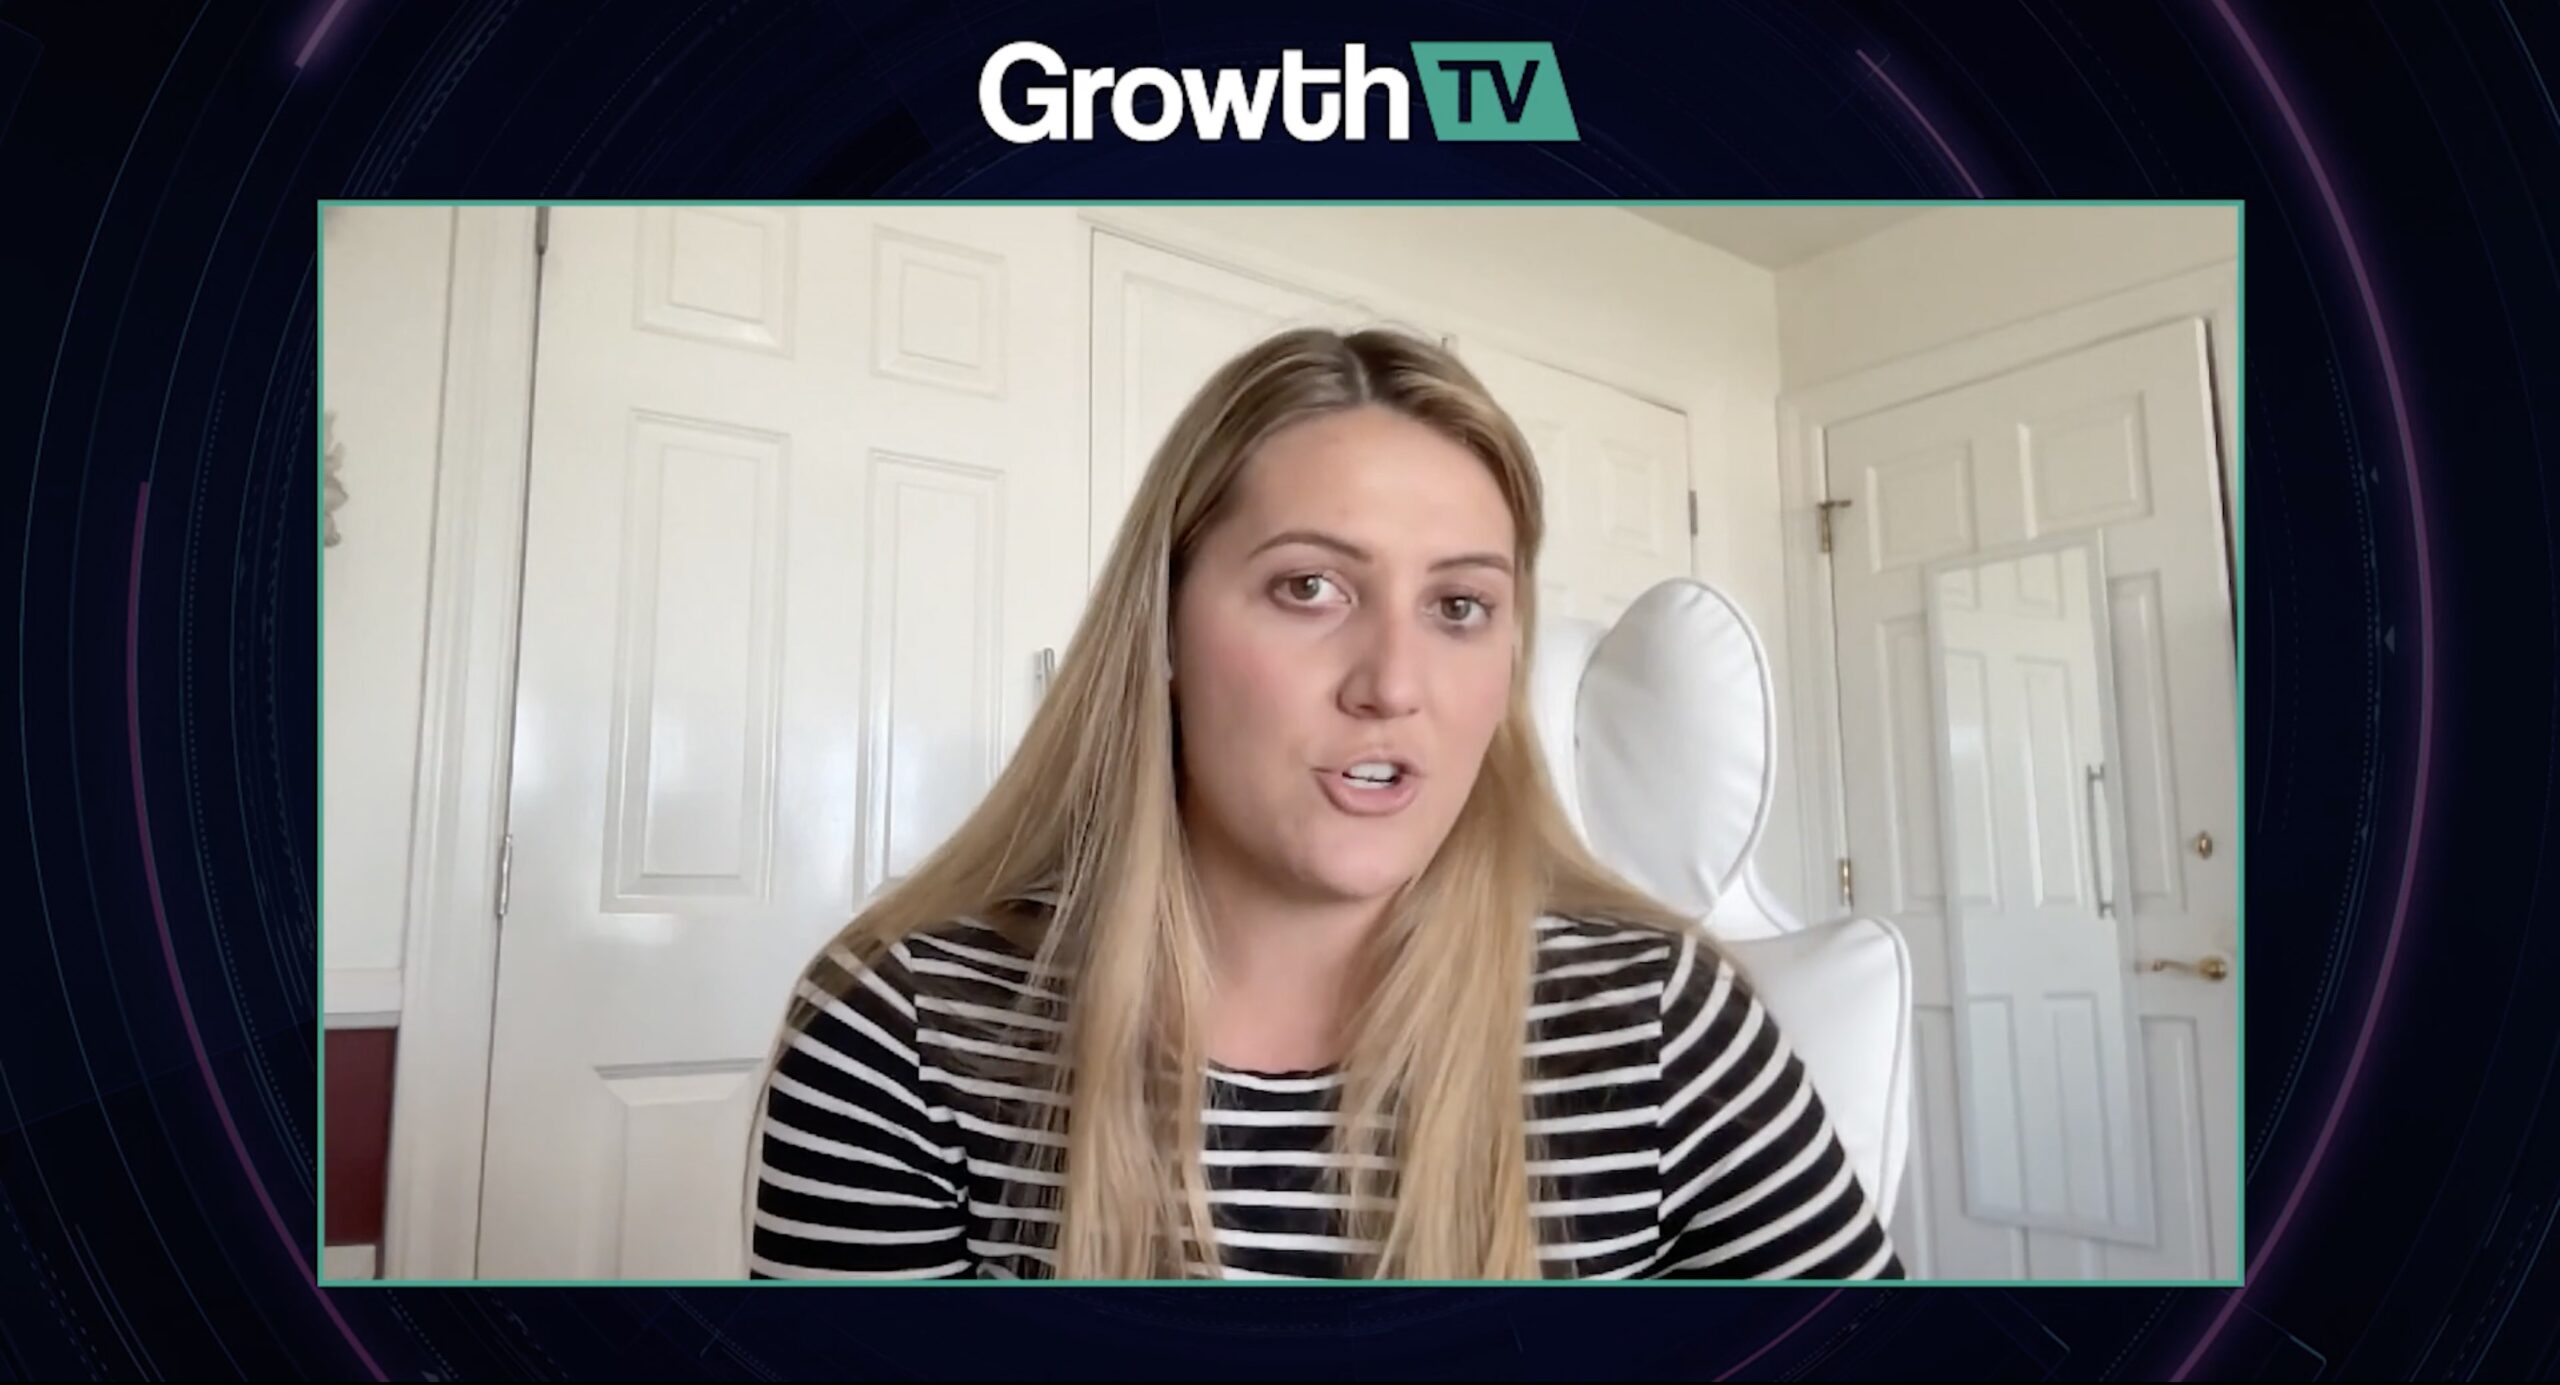 conversations-growthtv-wildfire-risk-ai